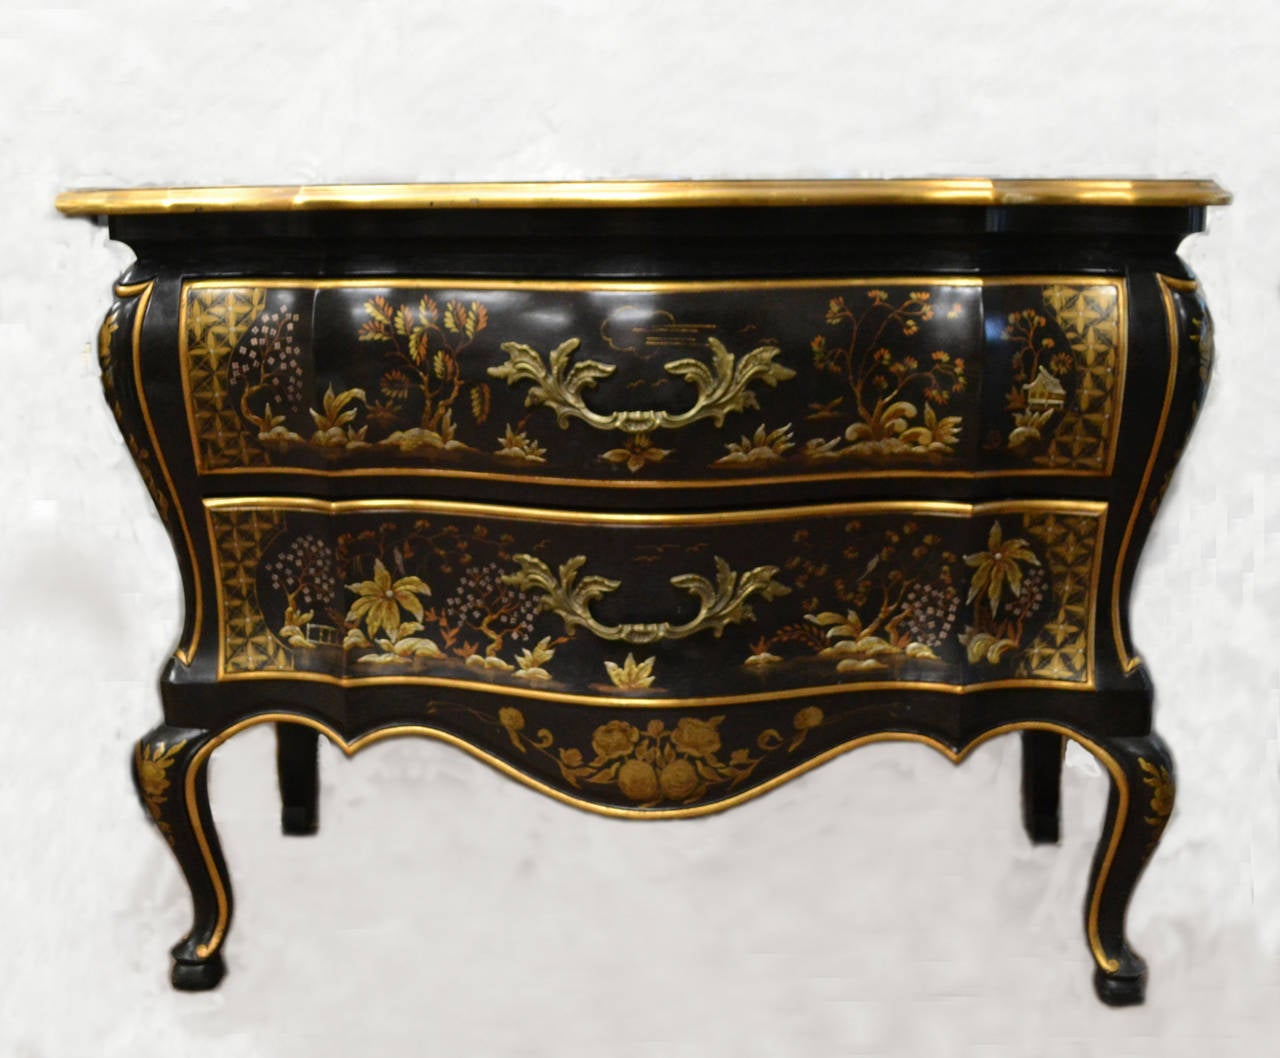 Pair of high quality John Widdicomb bombe Louis XV style commodes. Lacquered and parcel gilt finish with gilt 